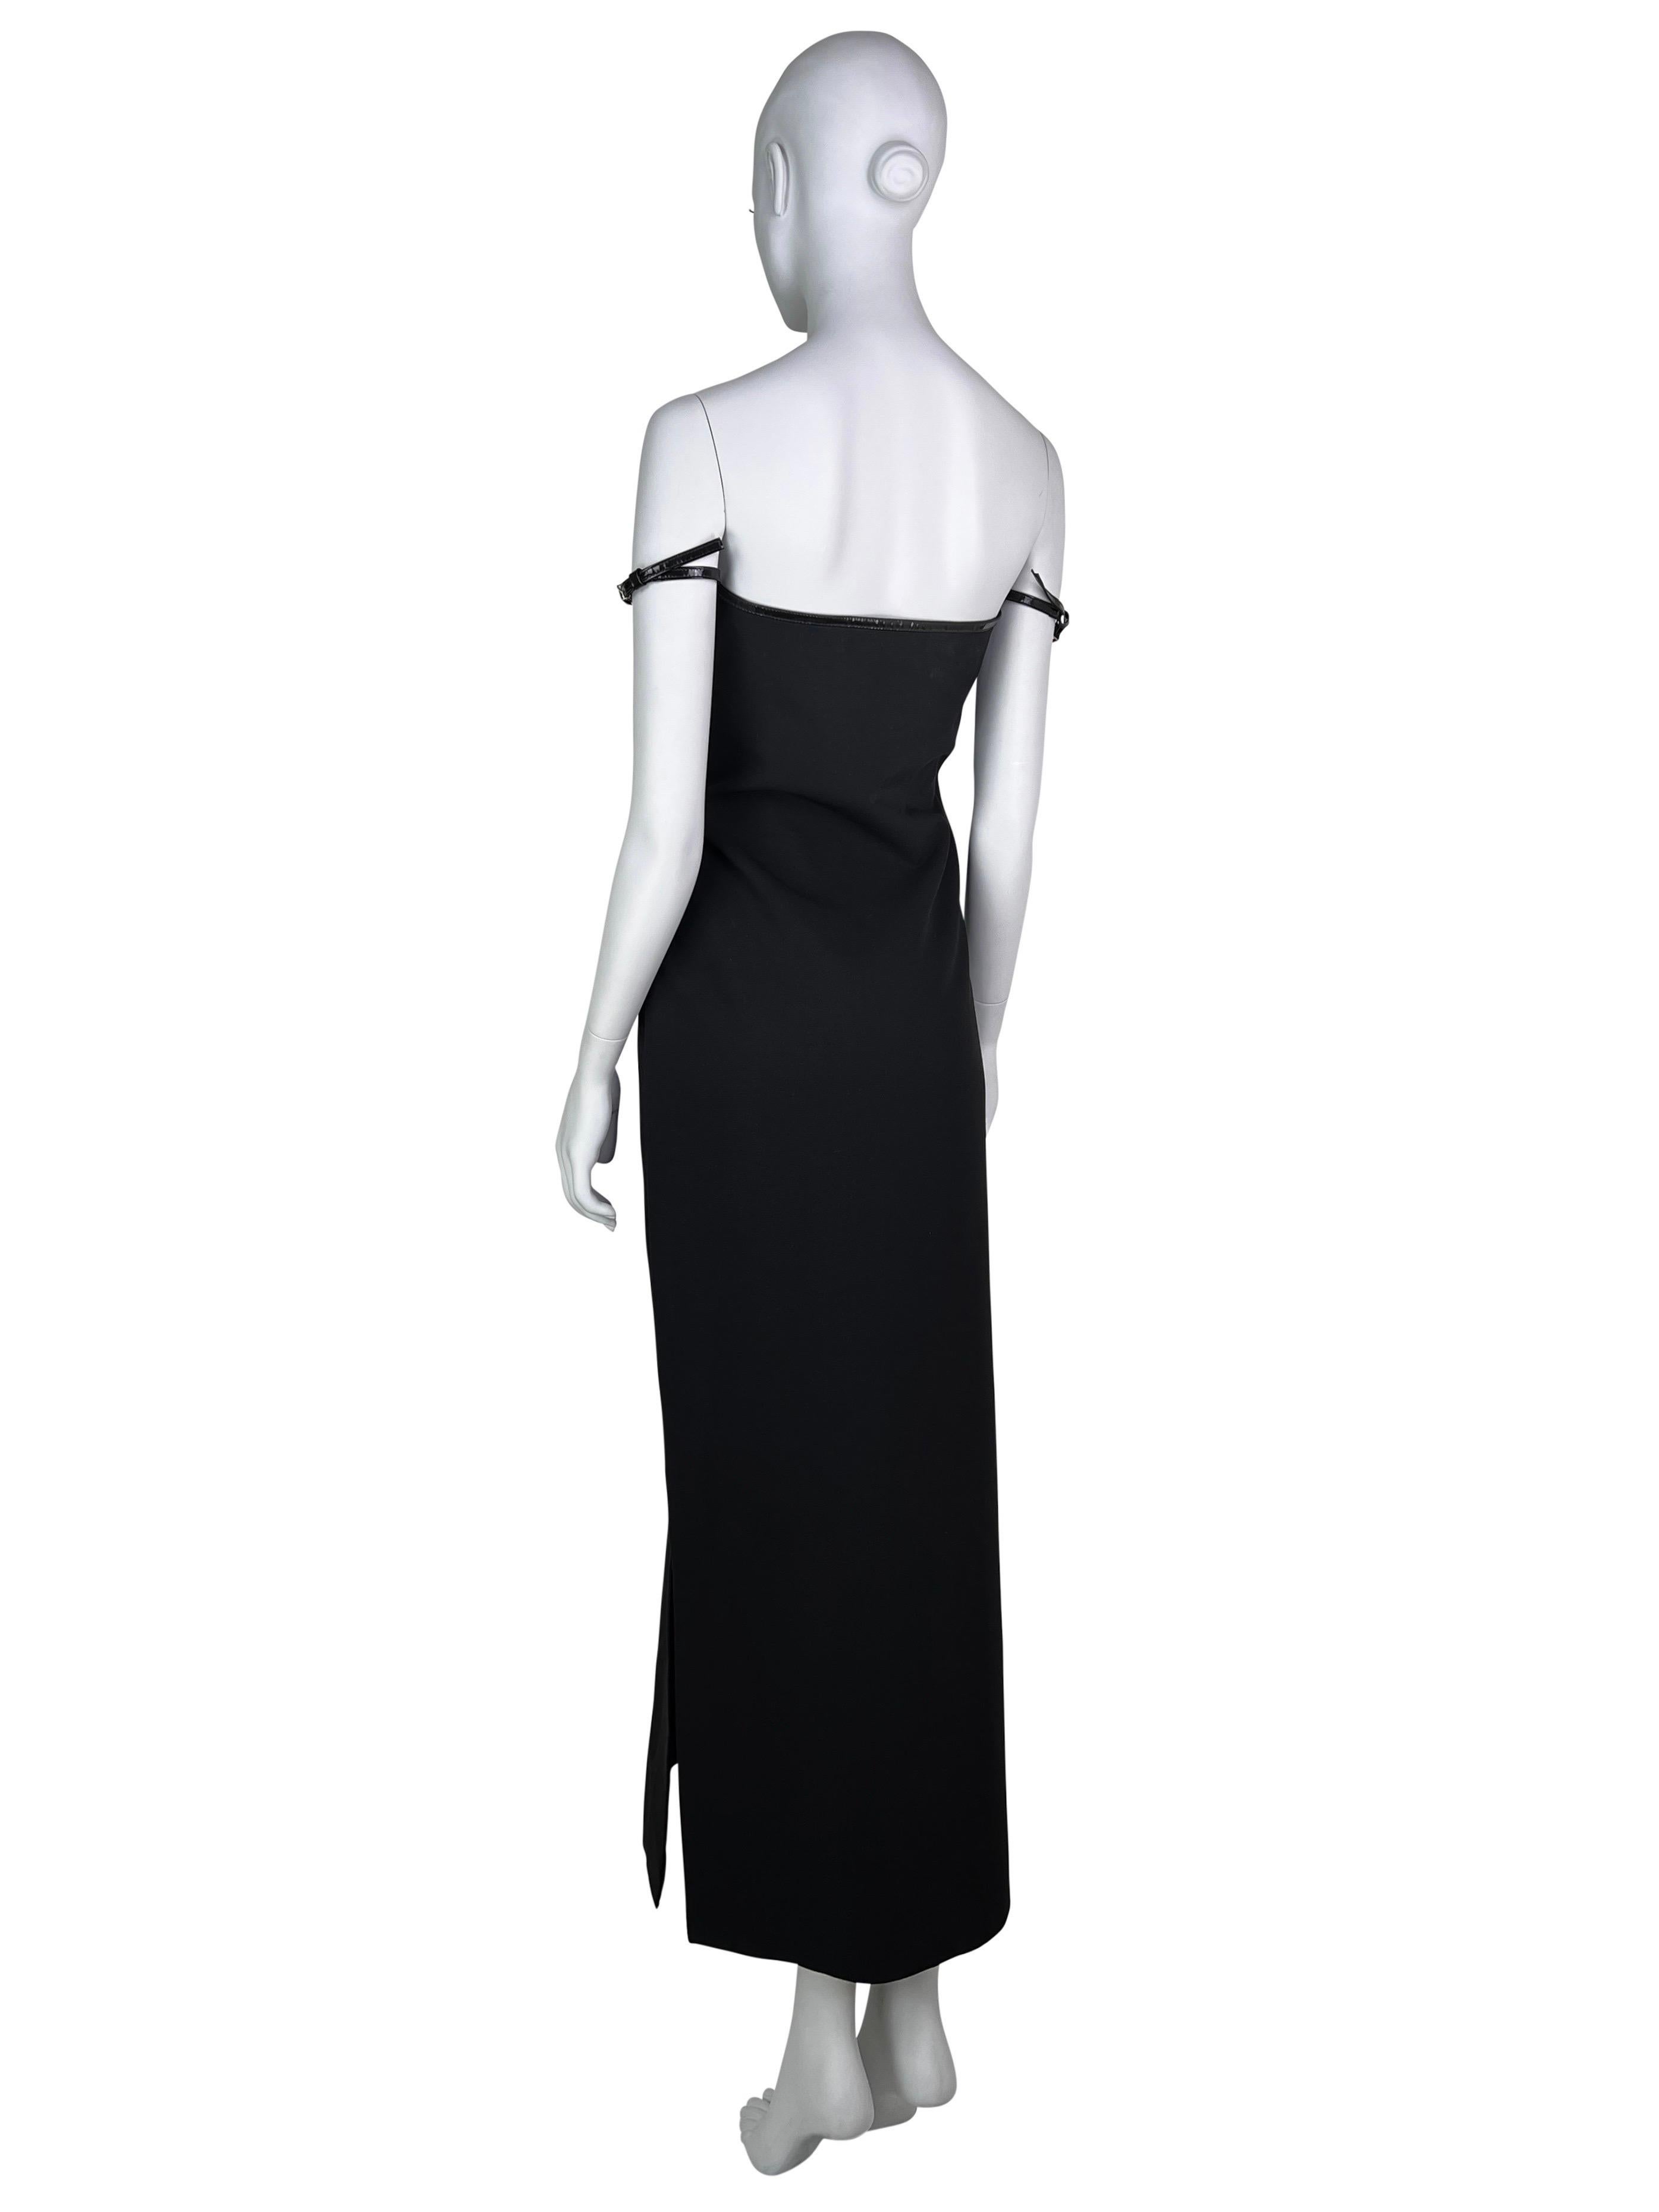 Gucci by Tom Ford Fall 1997 G-logo Strap Evening Black Dress For Sale 8